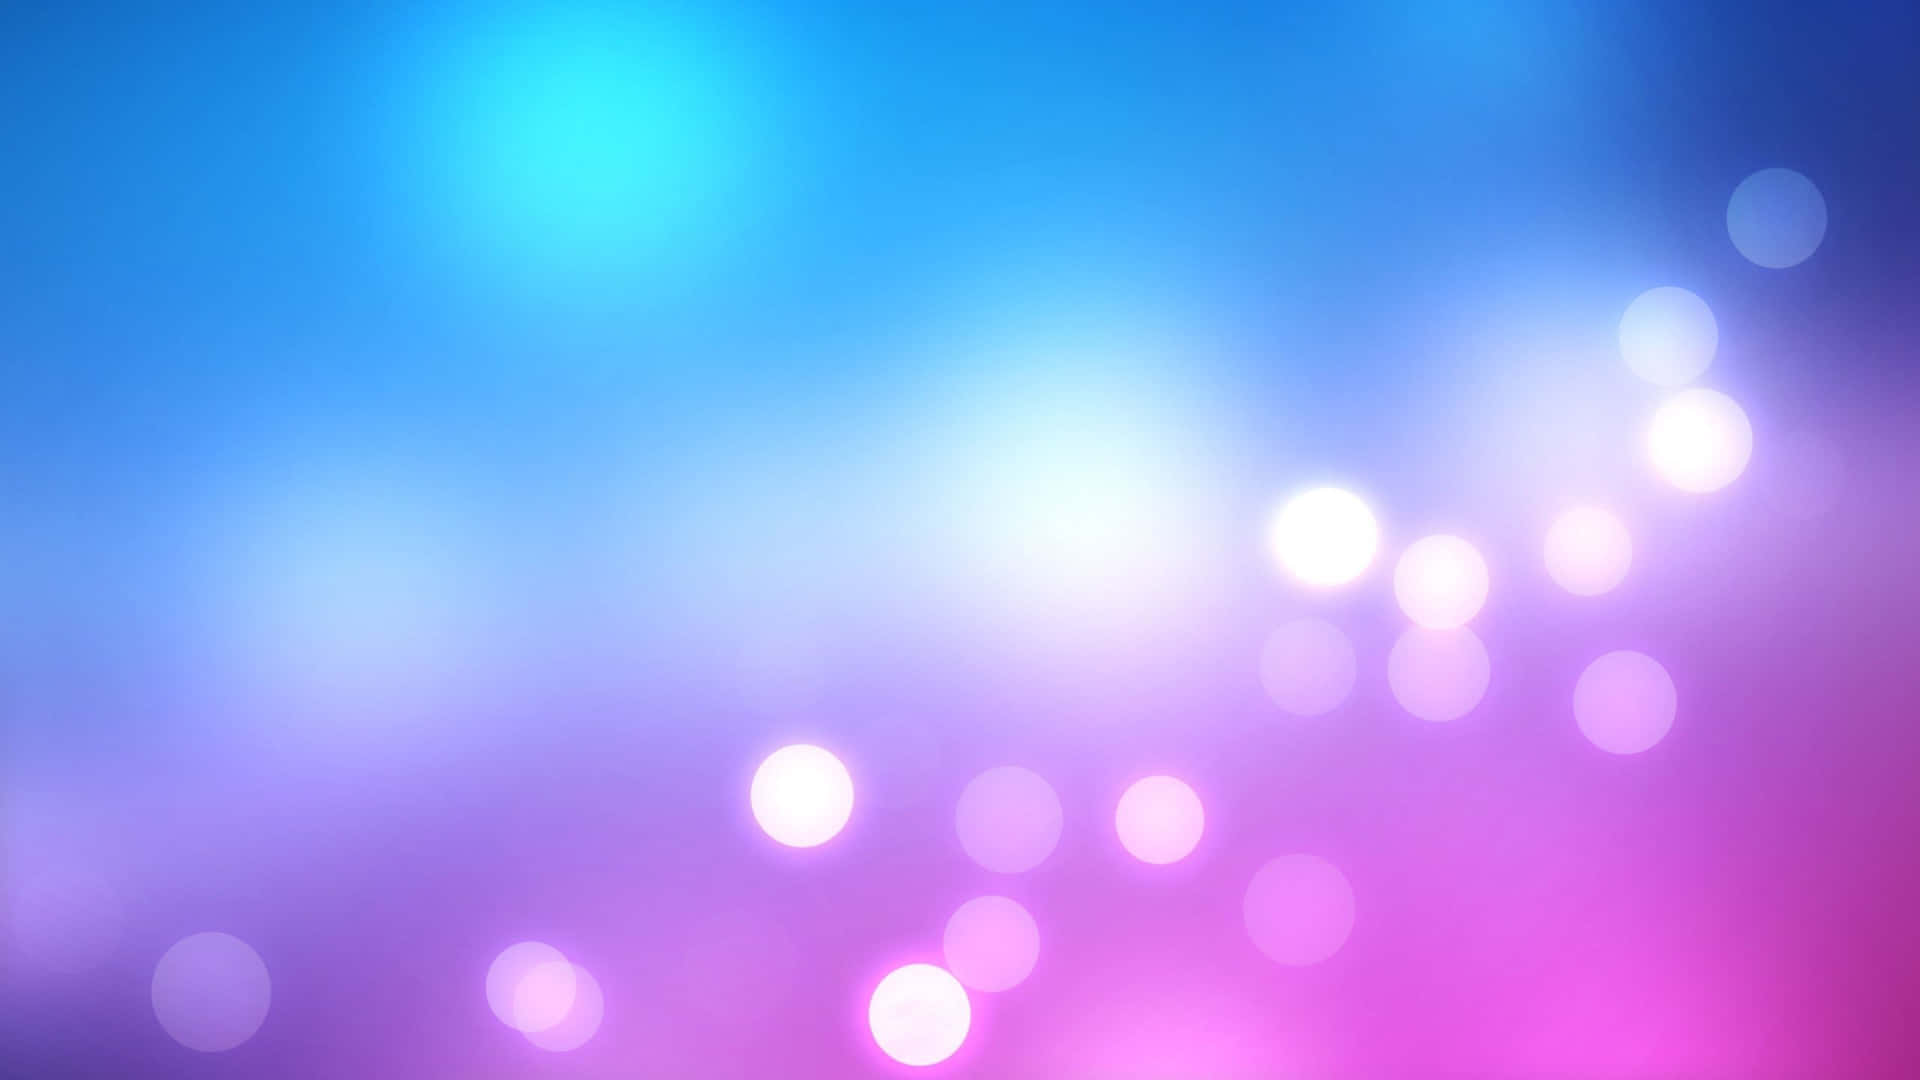 A bright, vibrant background of purple and pink